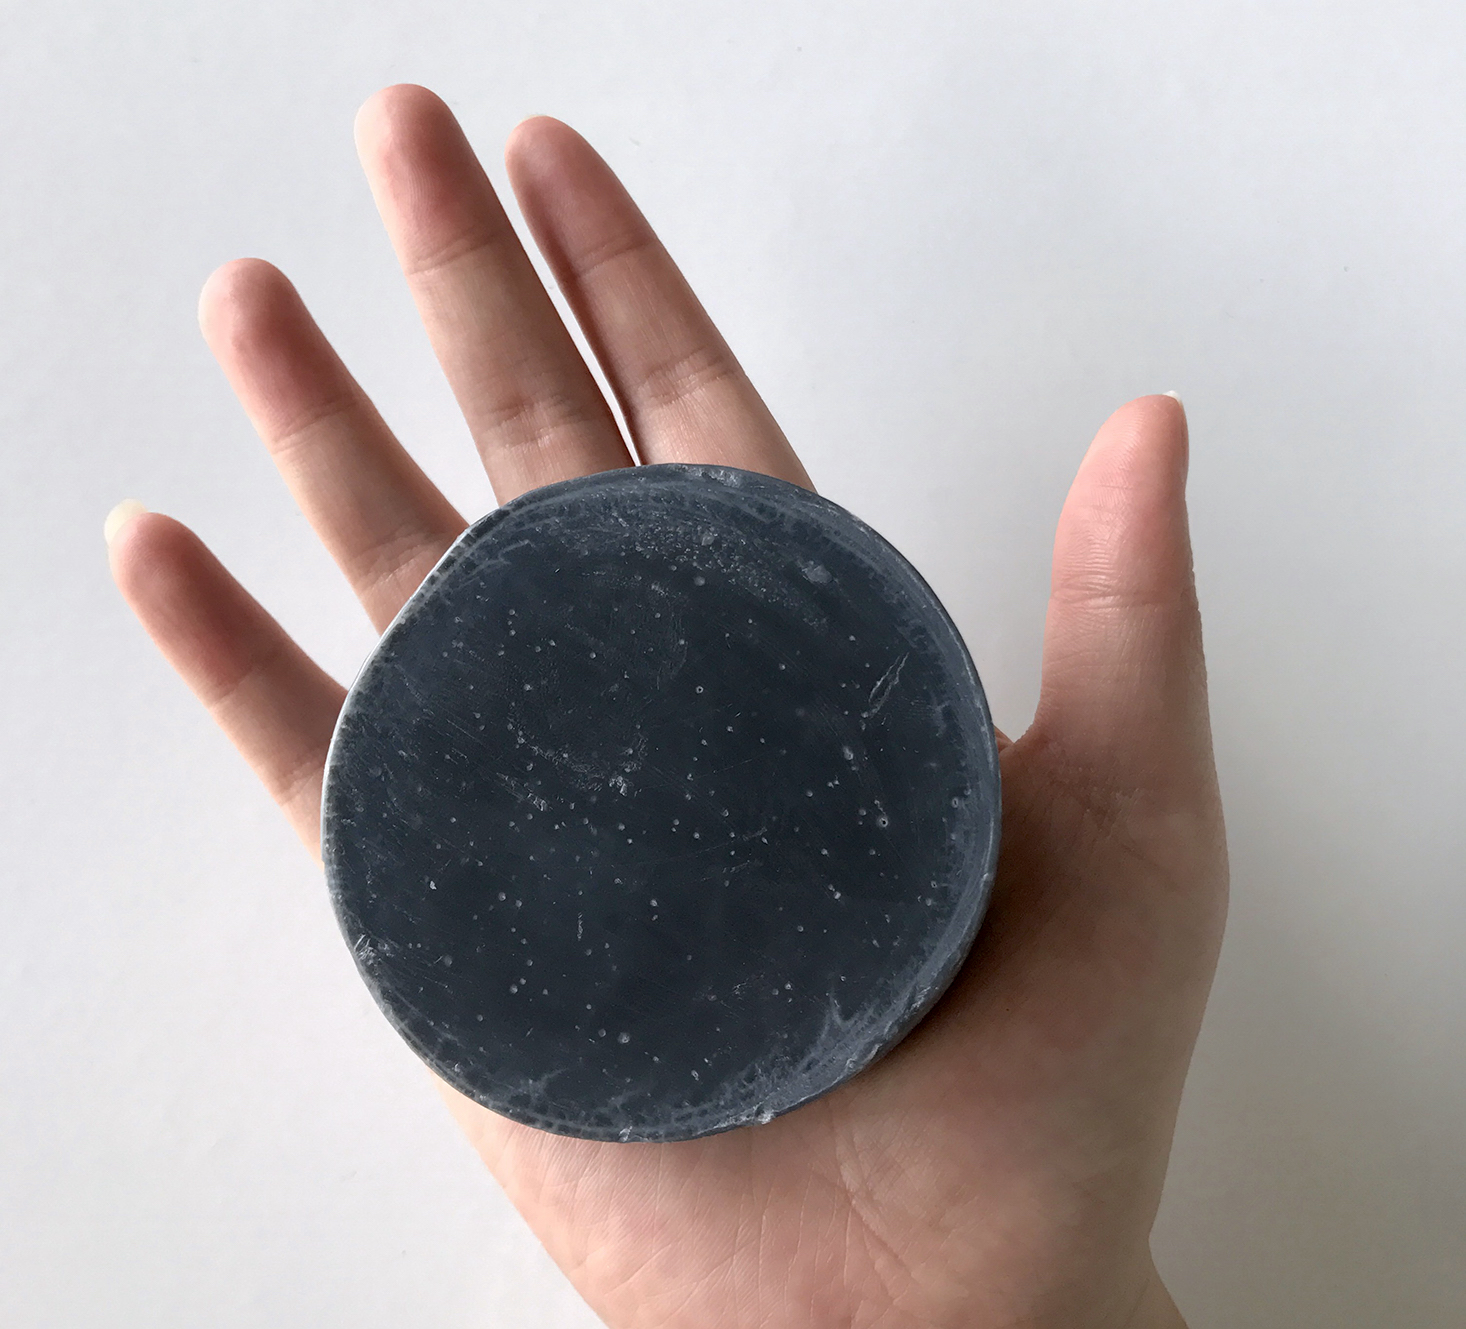 LuxePineapple-Post-March-2017-Charcoal-Soap-in-hand